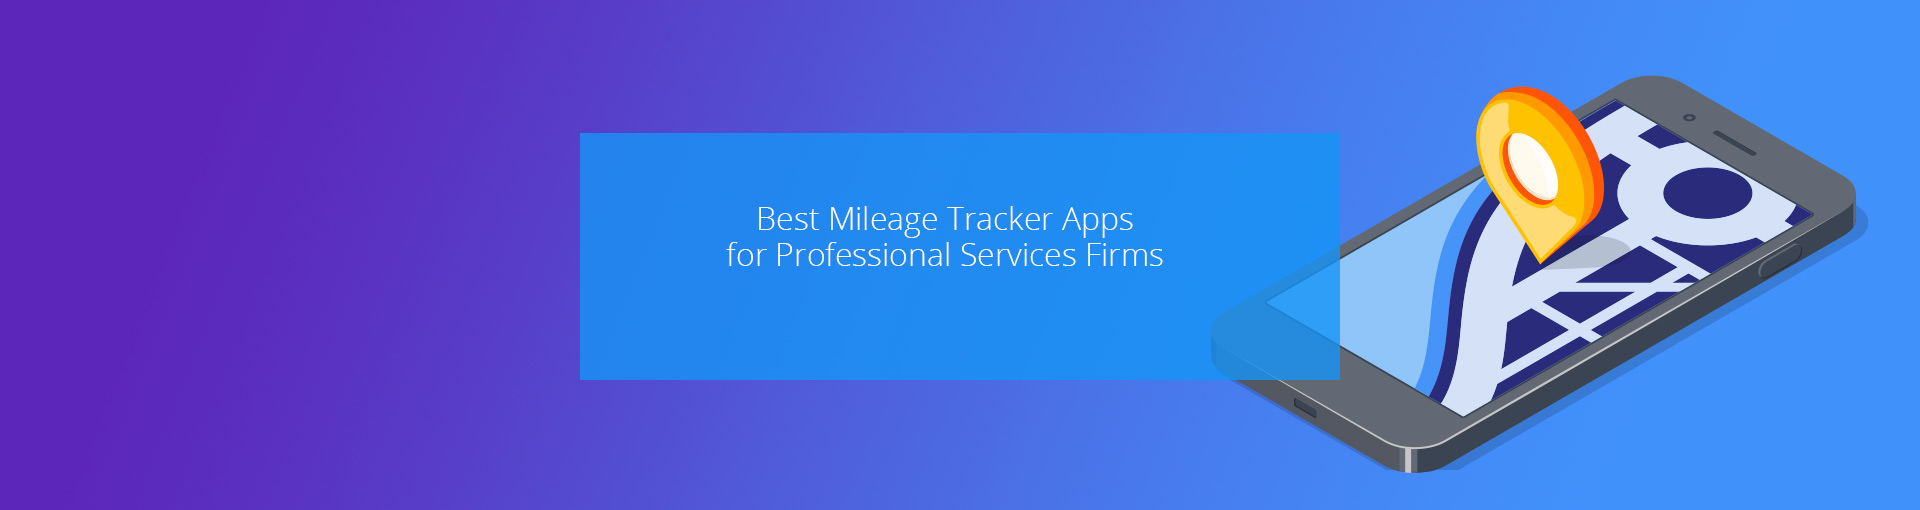 Best Mileage Tracker Apps for Professional Services Firms